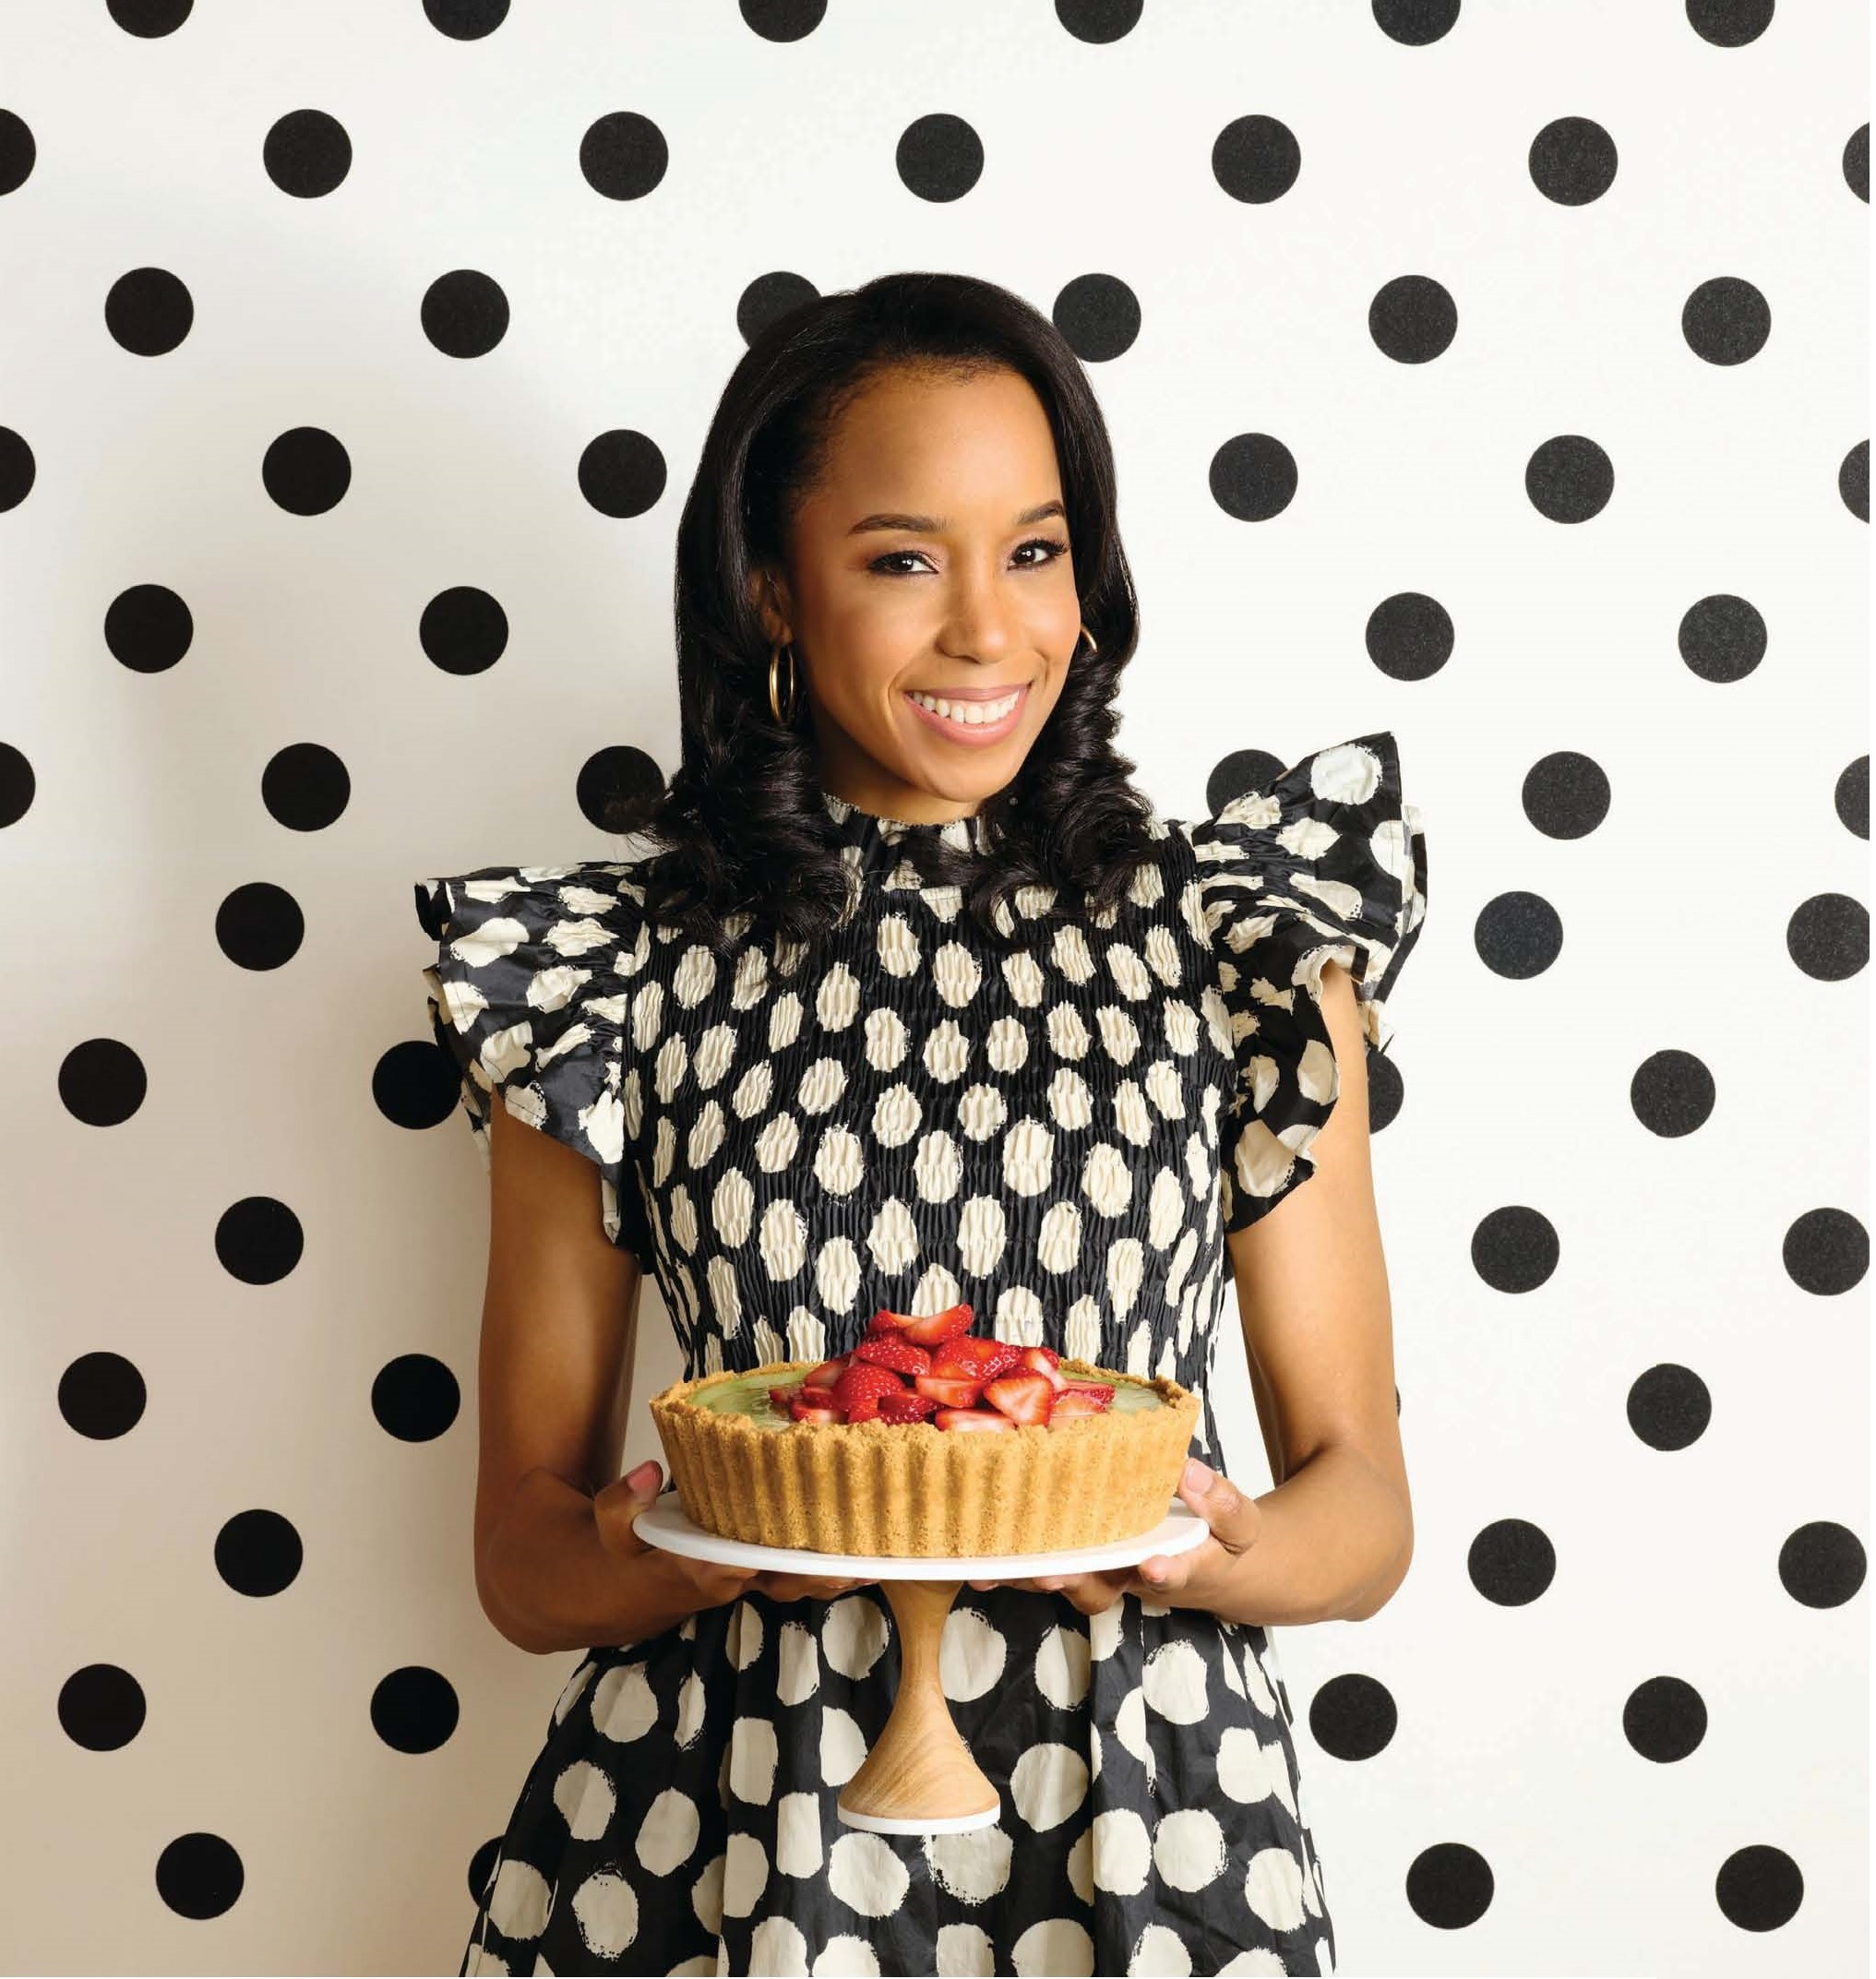 At her new Avalon Park bakery Justice of the Pies, Maya- Camille Broussard is serving up decadent desserts—and inspiring fellow Chicagoans along the way. PHOTO © 2022 BY DAN GOLDBERG